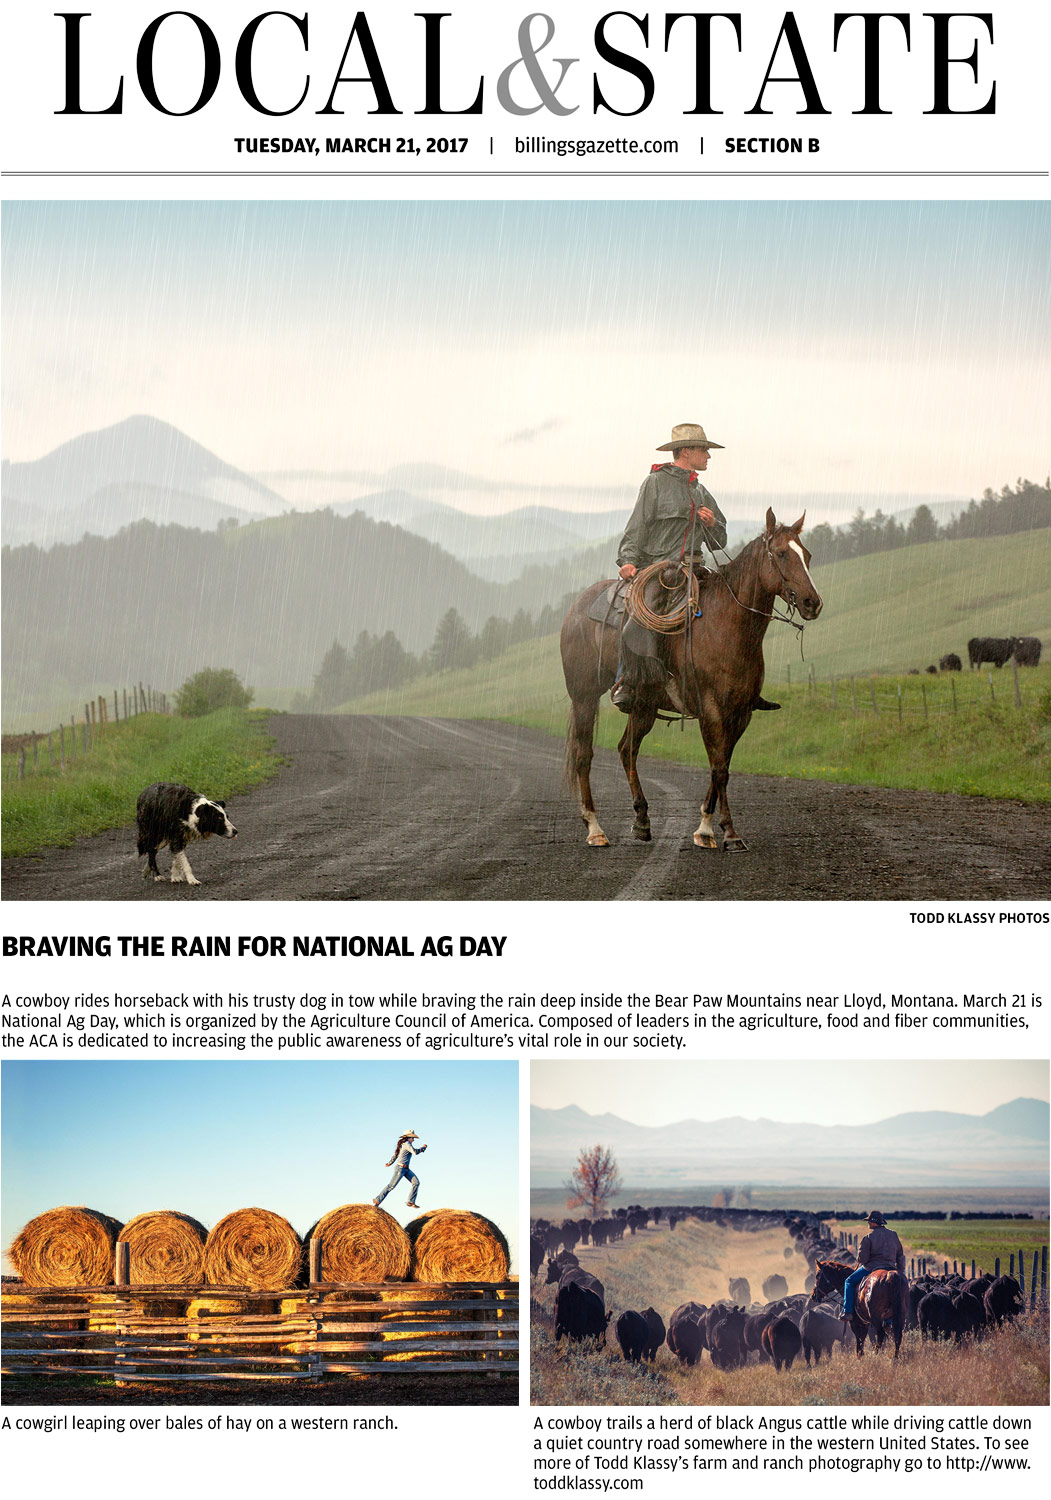 Agriculture-Photos-for-National-Ag-Day-Appear-in-Billings-Gazette-Newspaper